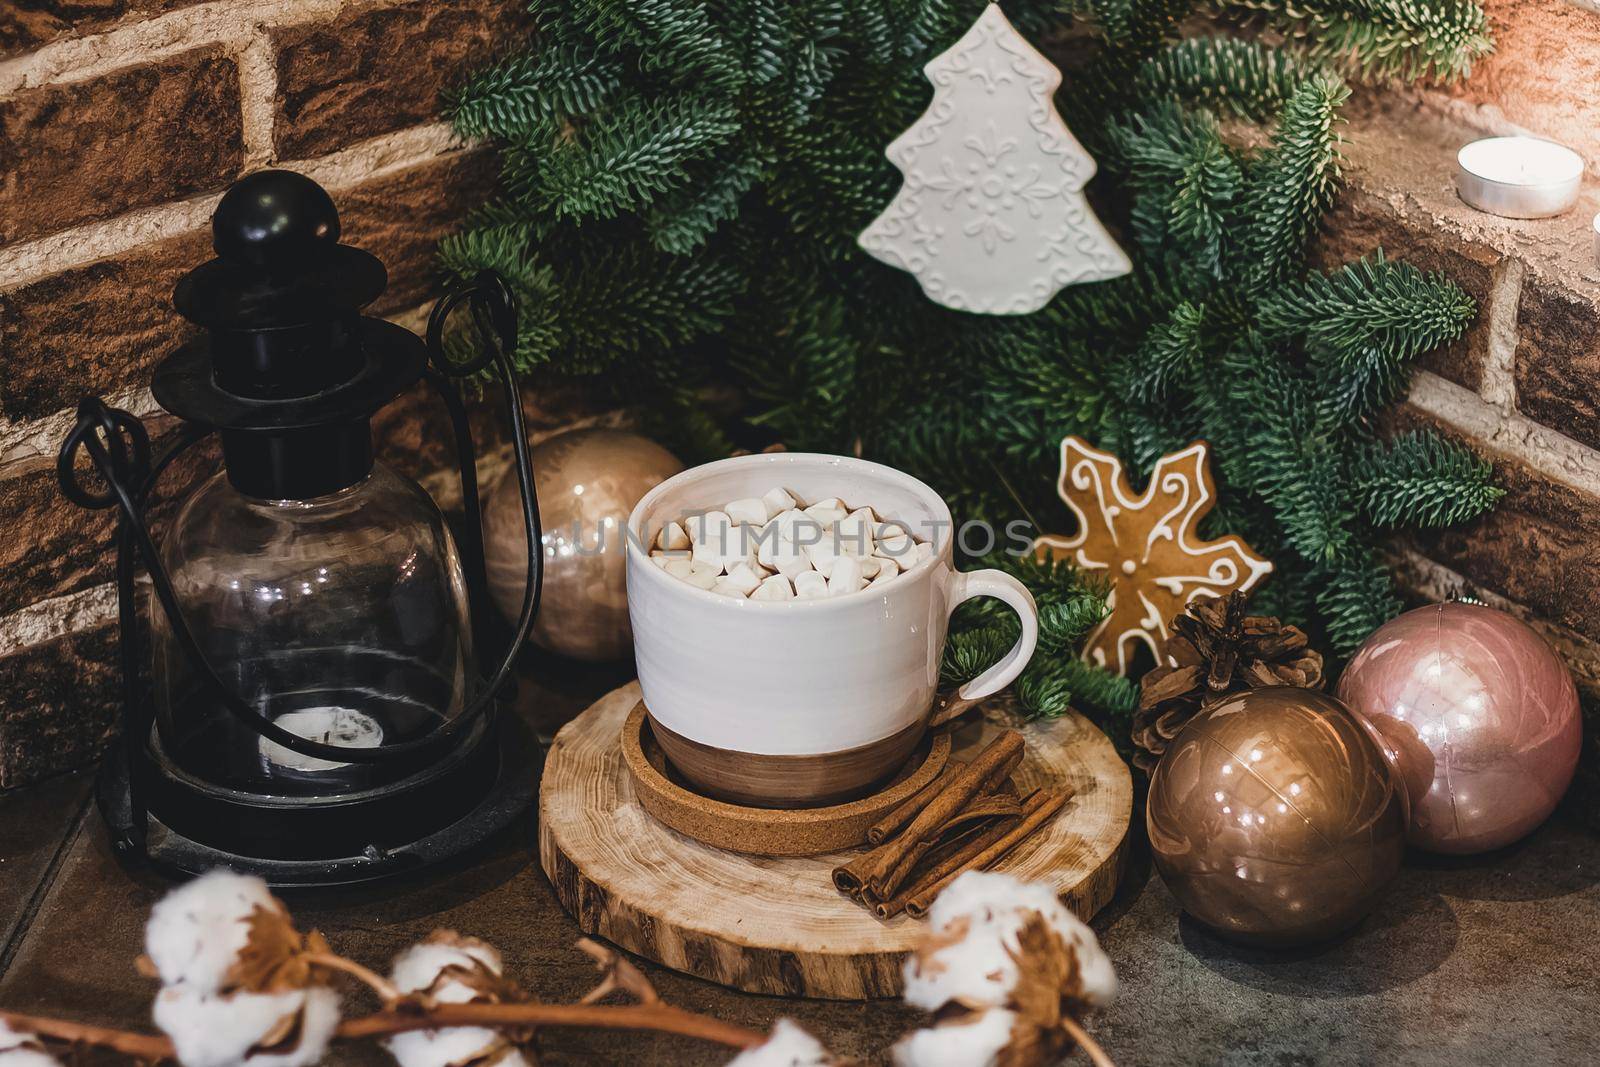 Christmas hot chocolate with mini marshmellows in an old ceramic mug with candles on a wooden background.